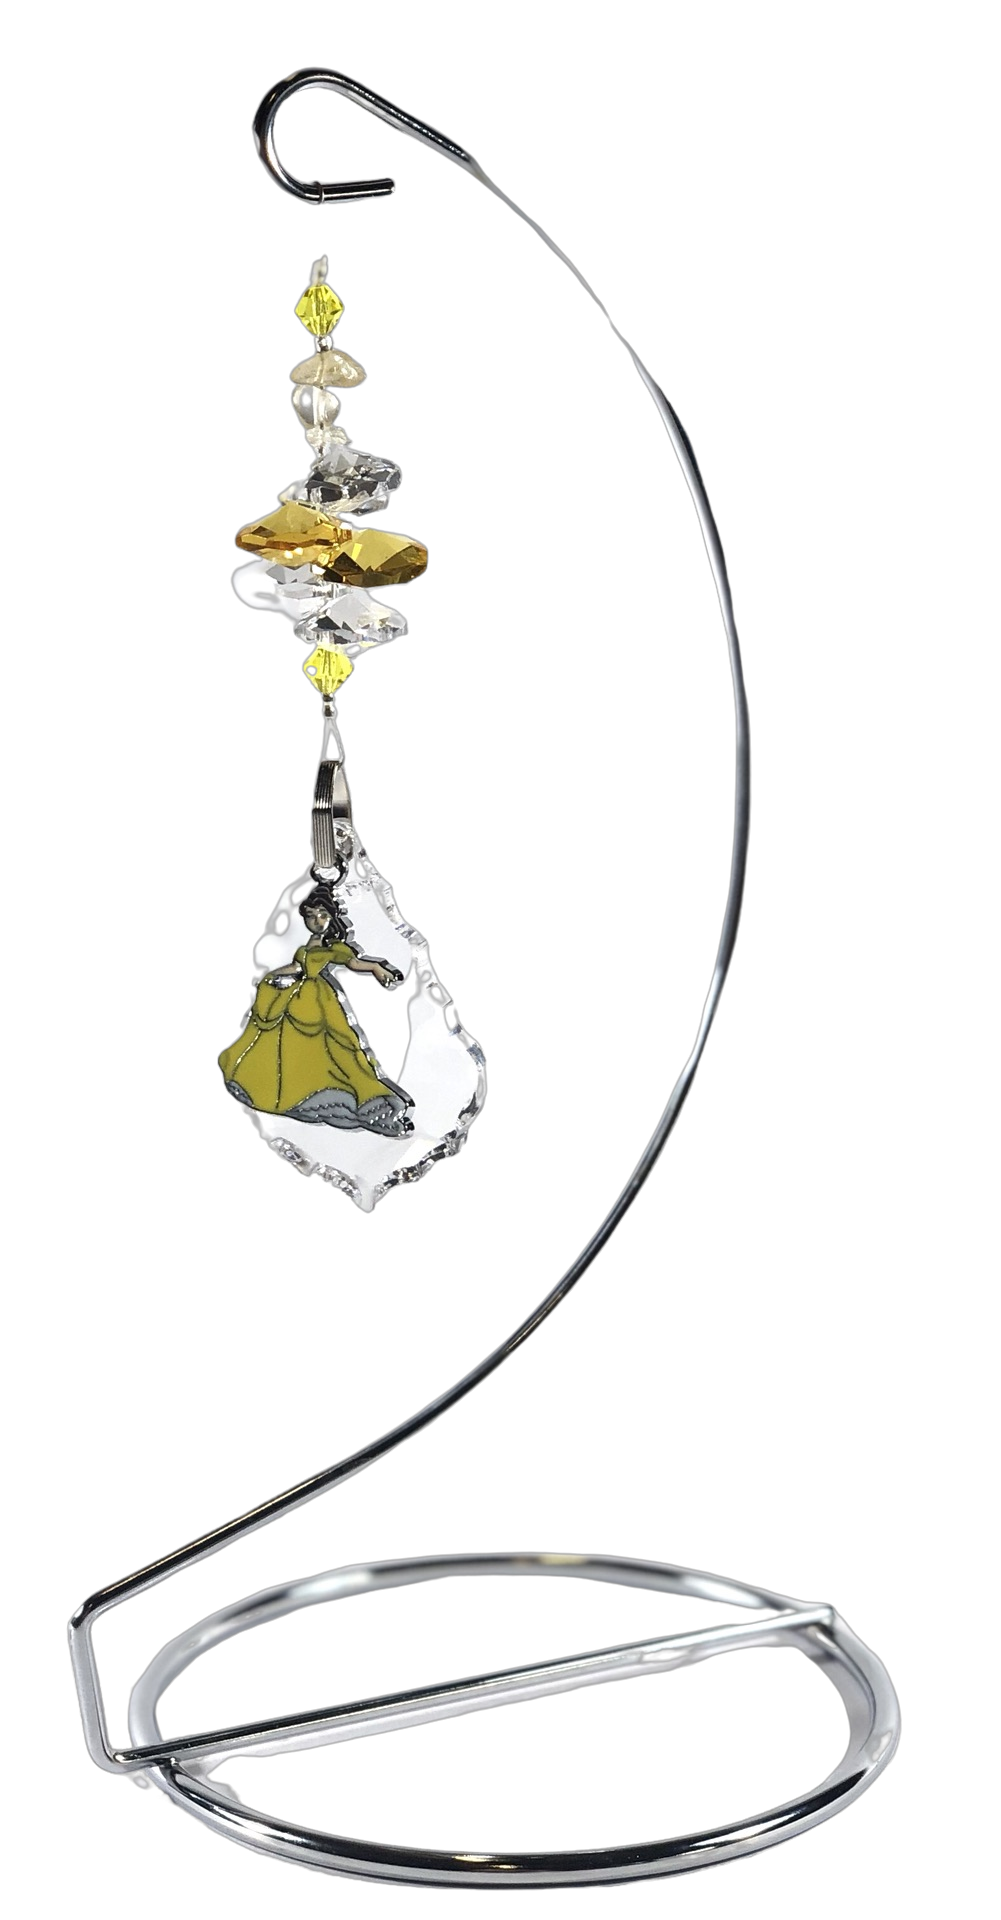 Beauty and the Beast - Belle crystal suncatcher is decorated with citrine gemstones and come on this amazing stand.